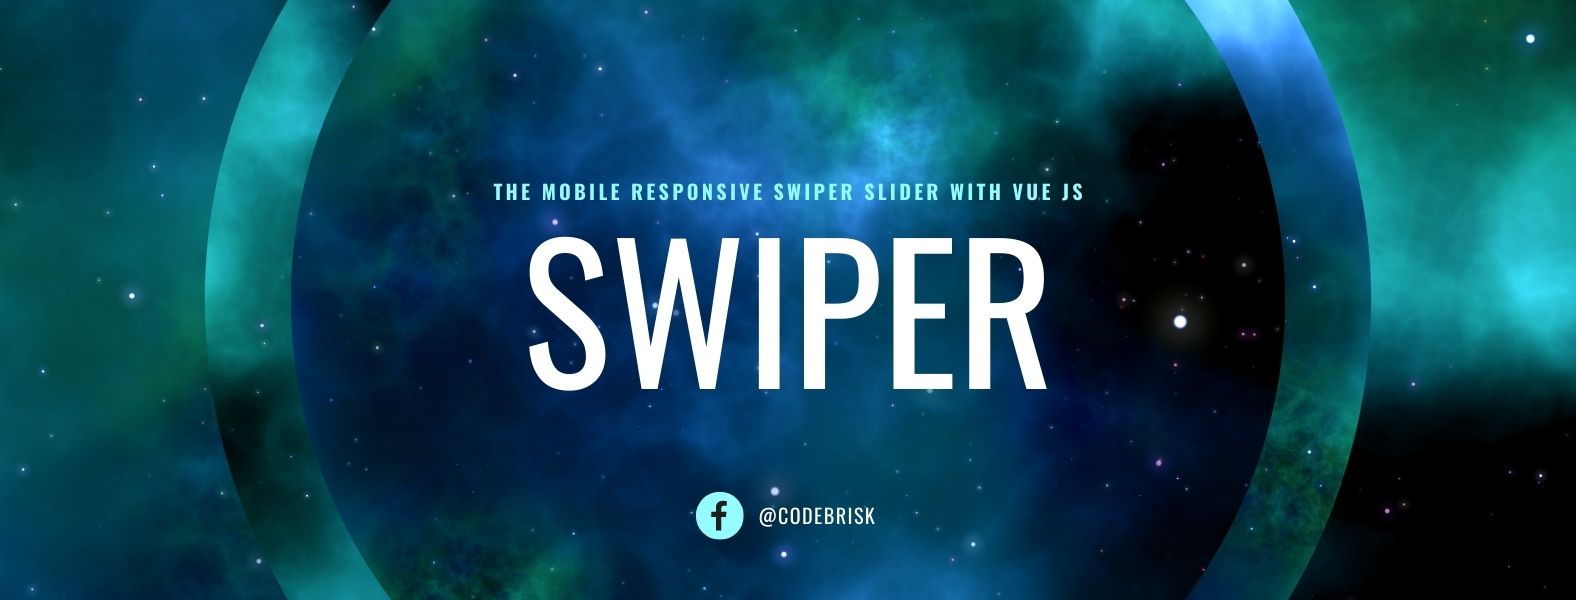 The Mobile Responsive Swiper Slider with Vue Js